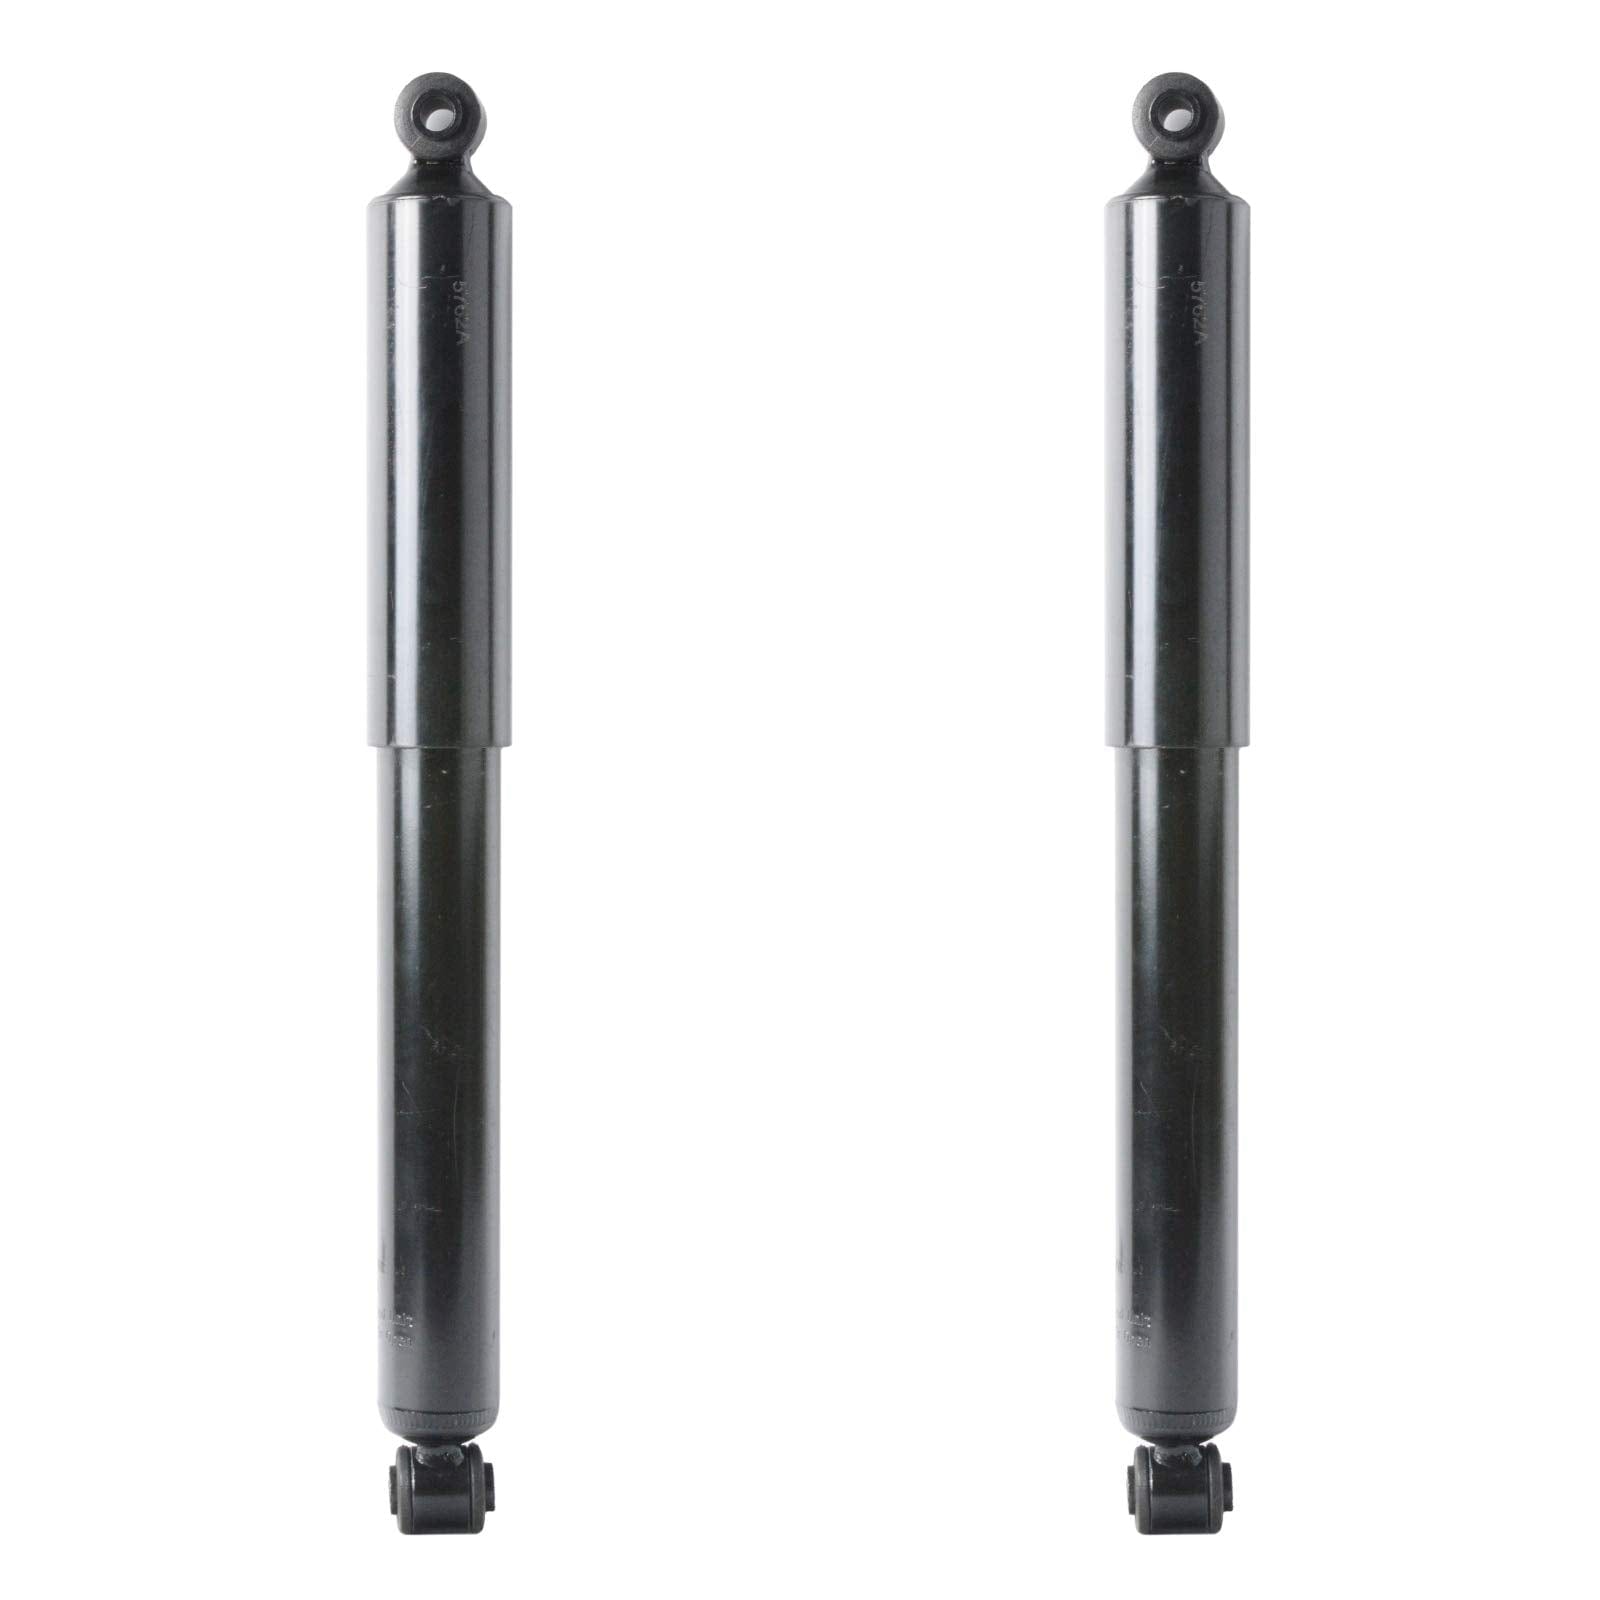 GARVEE Rear Pair Complete Shock Absorbers Assembly Compatible for Equinox Terrain Torrent Green Line - 345055